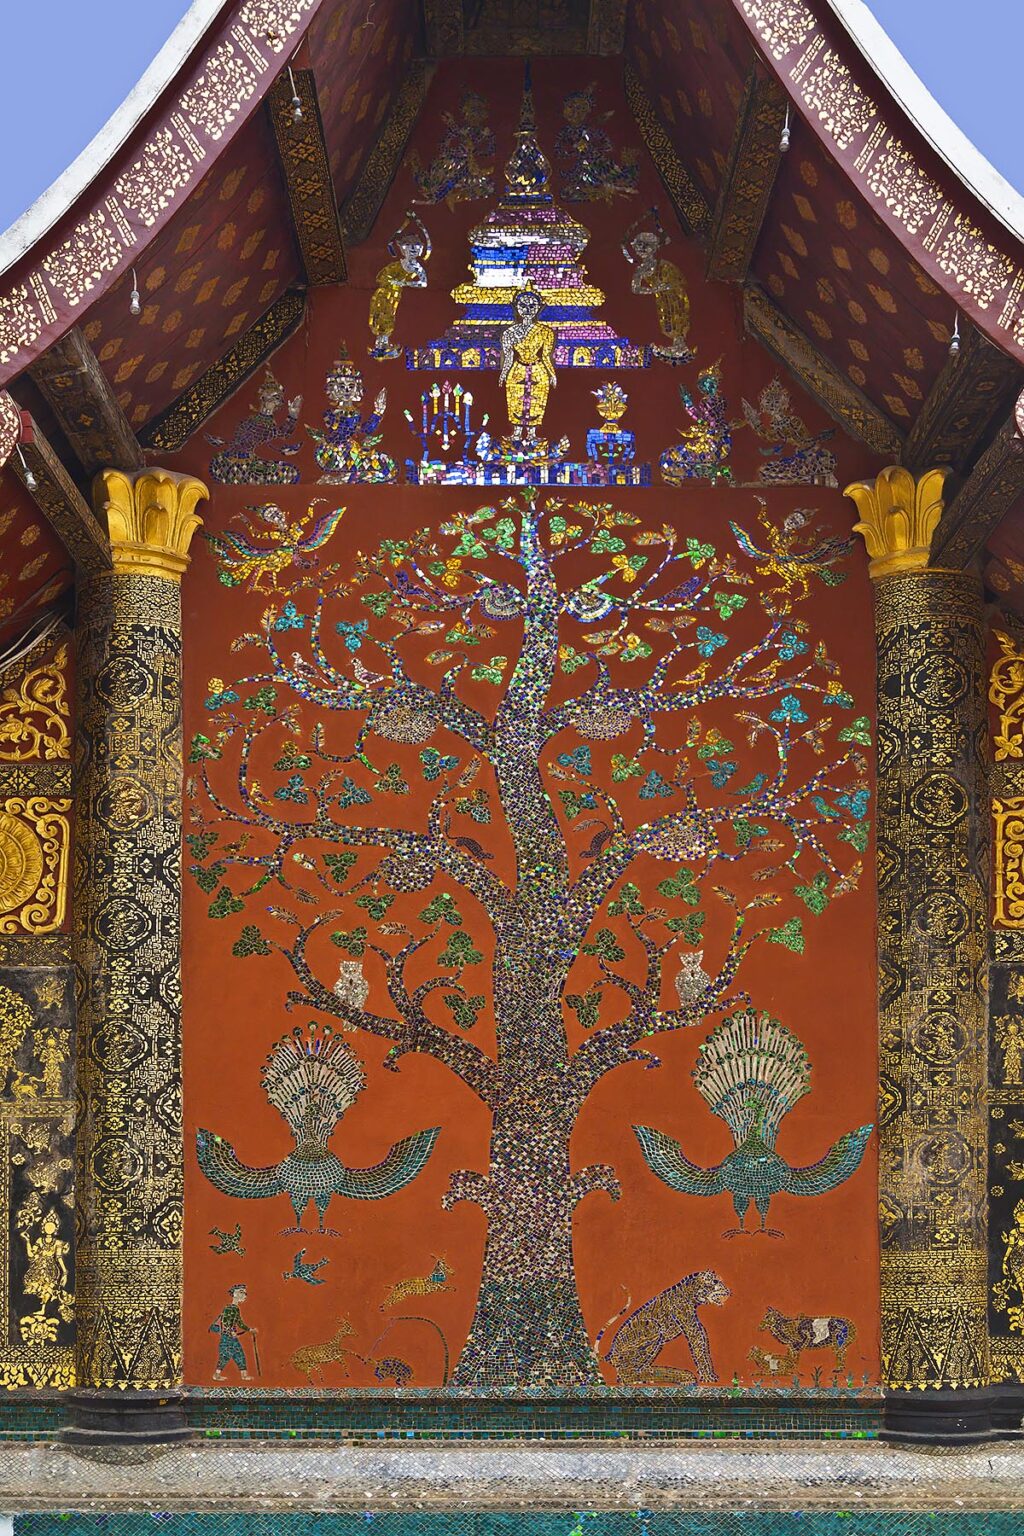 GLASS MOSAIC of the TREE OF LIFE decorates WAT XIENG THONG (Temple of the Golden City) , built in 1560 - LUANG PRABANG, LAOS